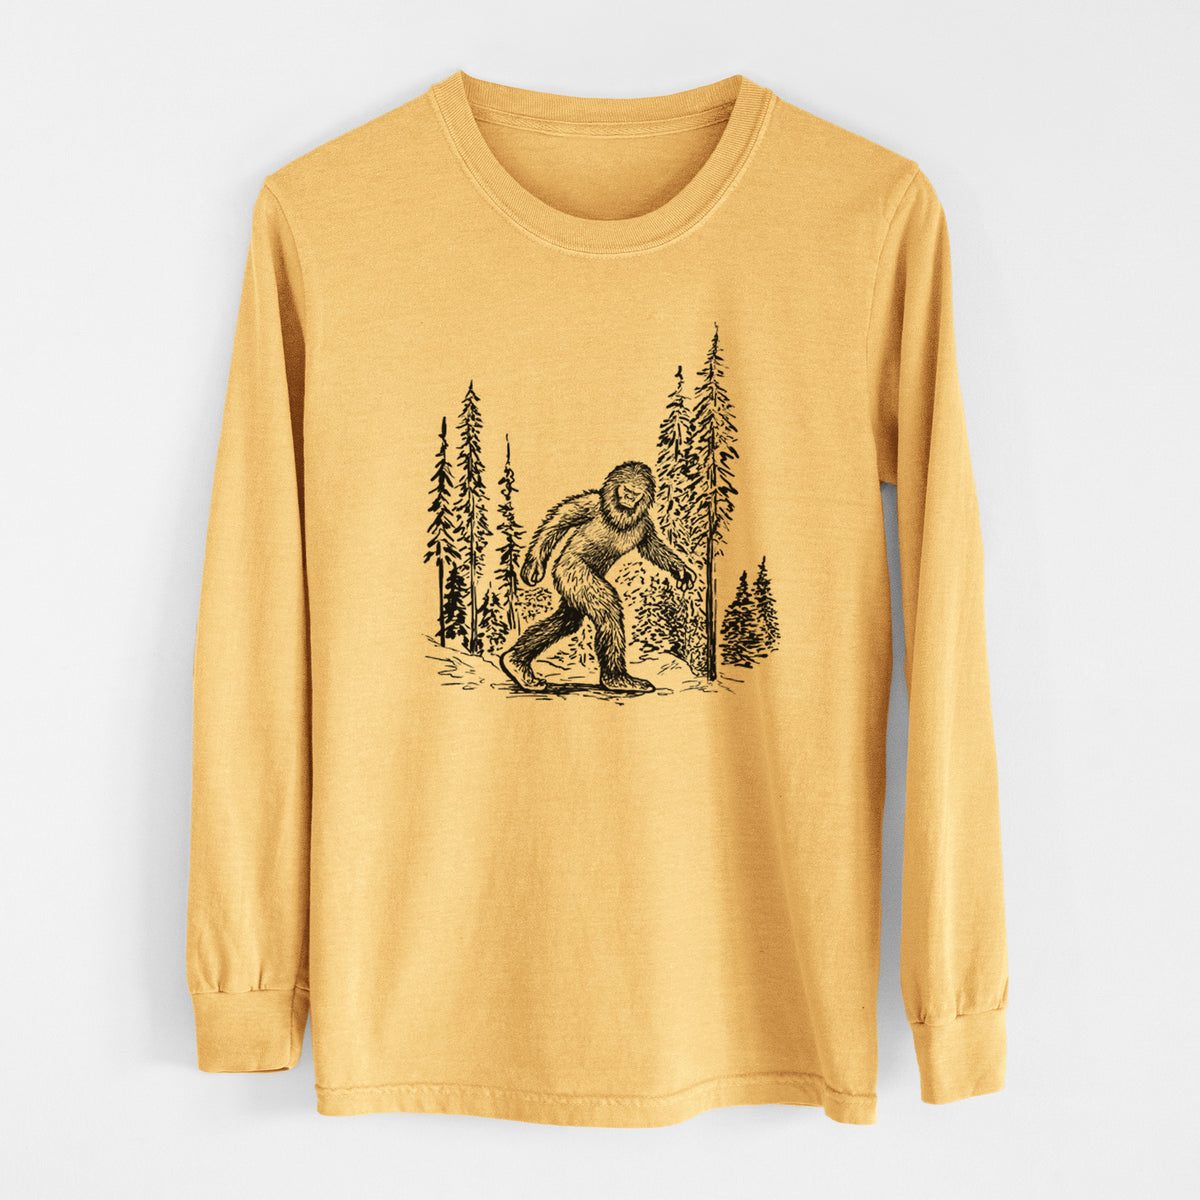 Bigfoot in the Woods - Heavyweight 100% Cotton Long Sleeve